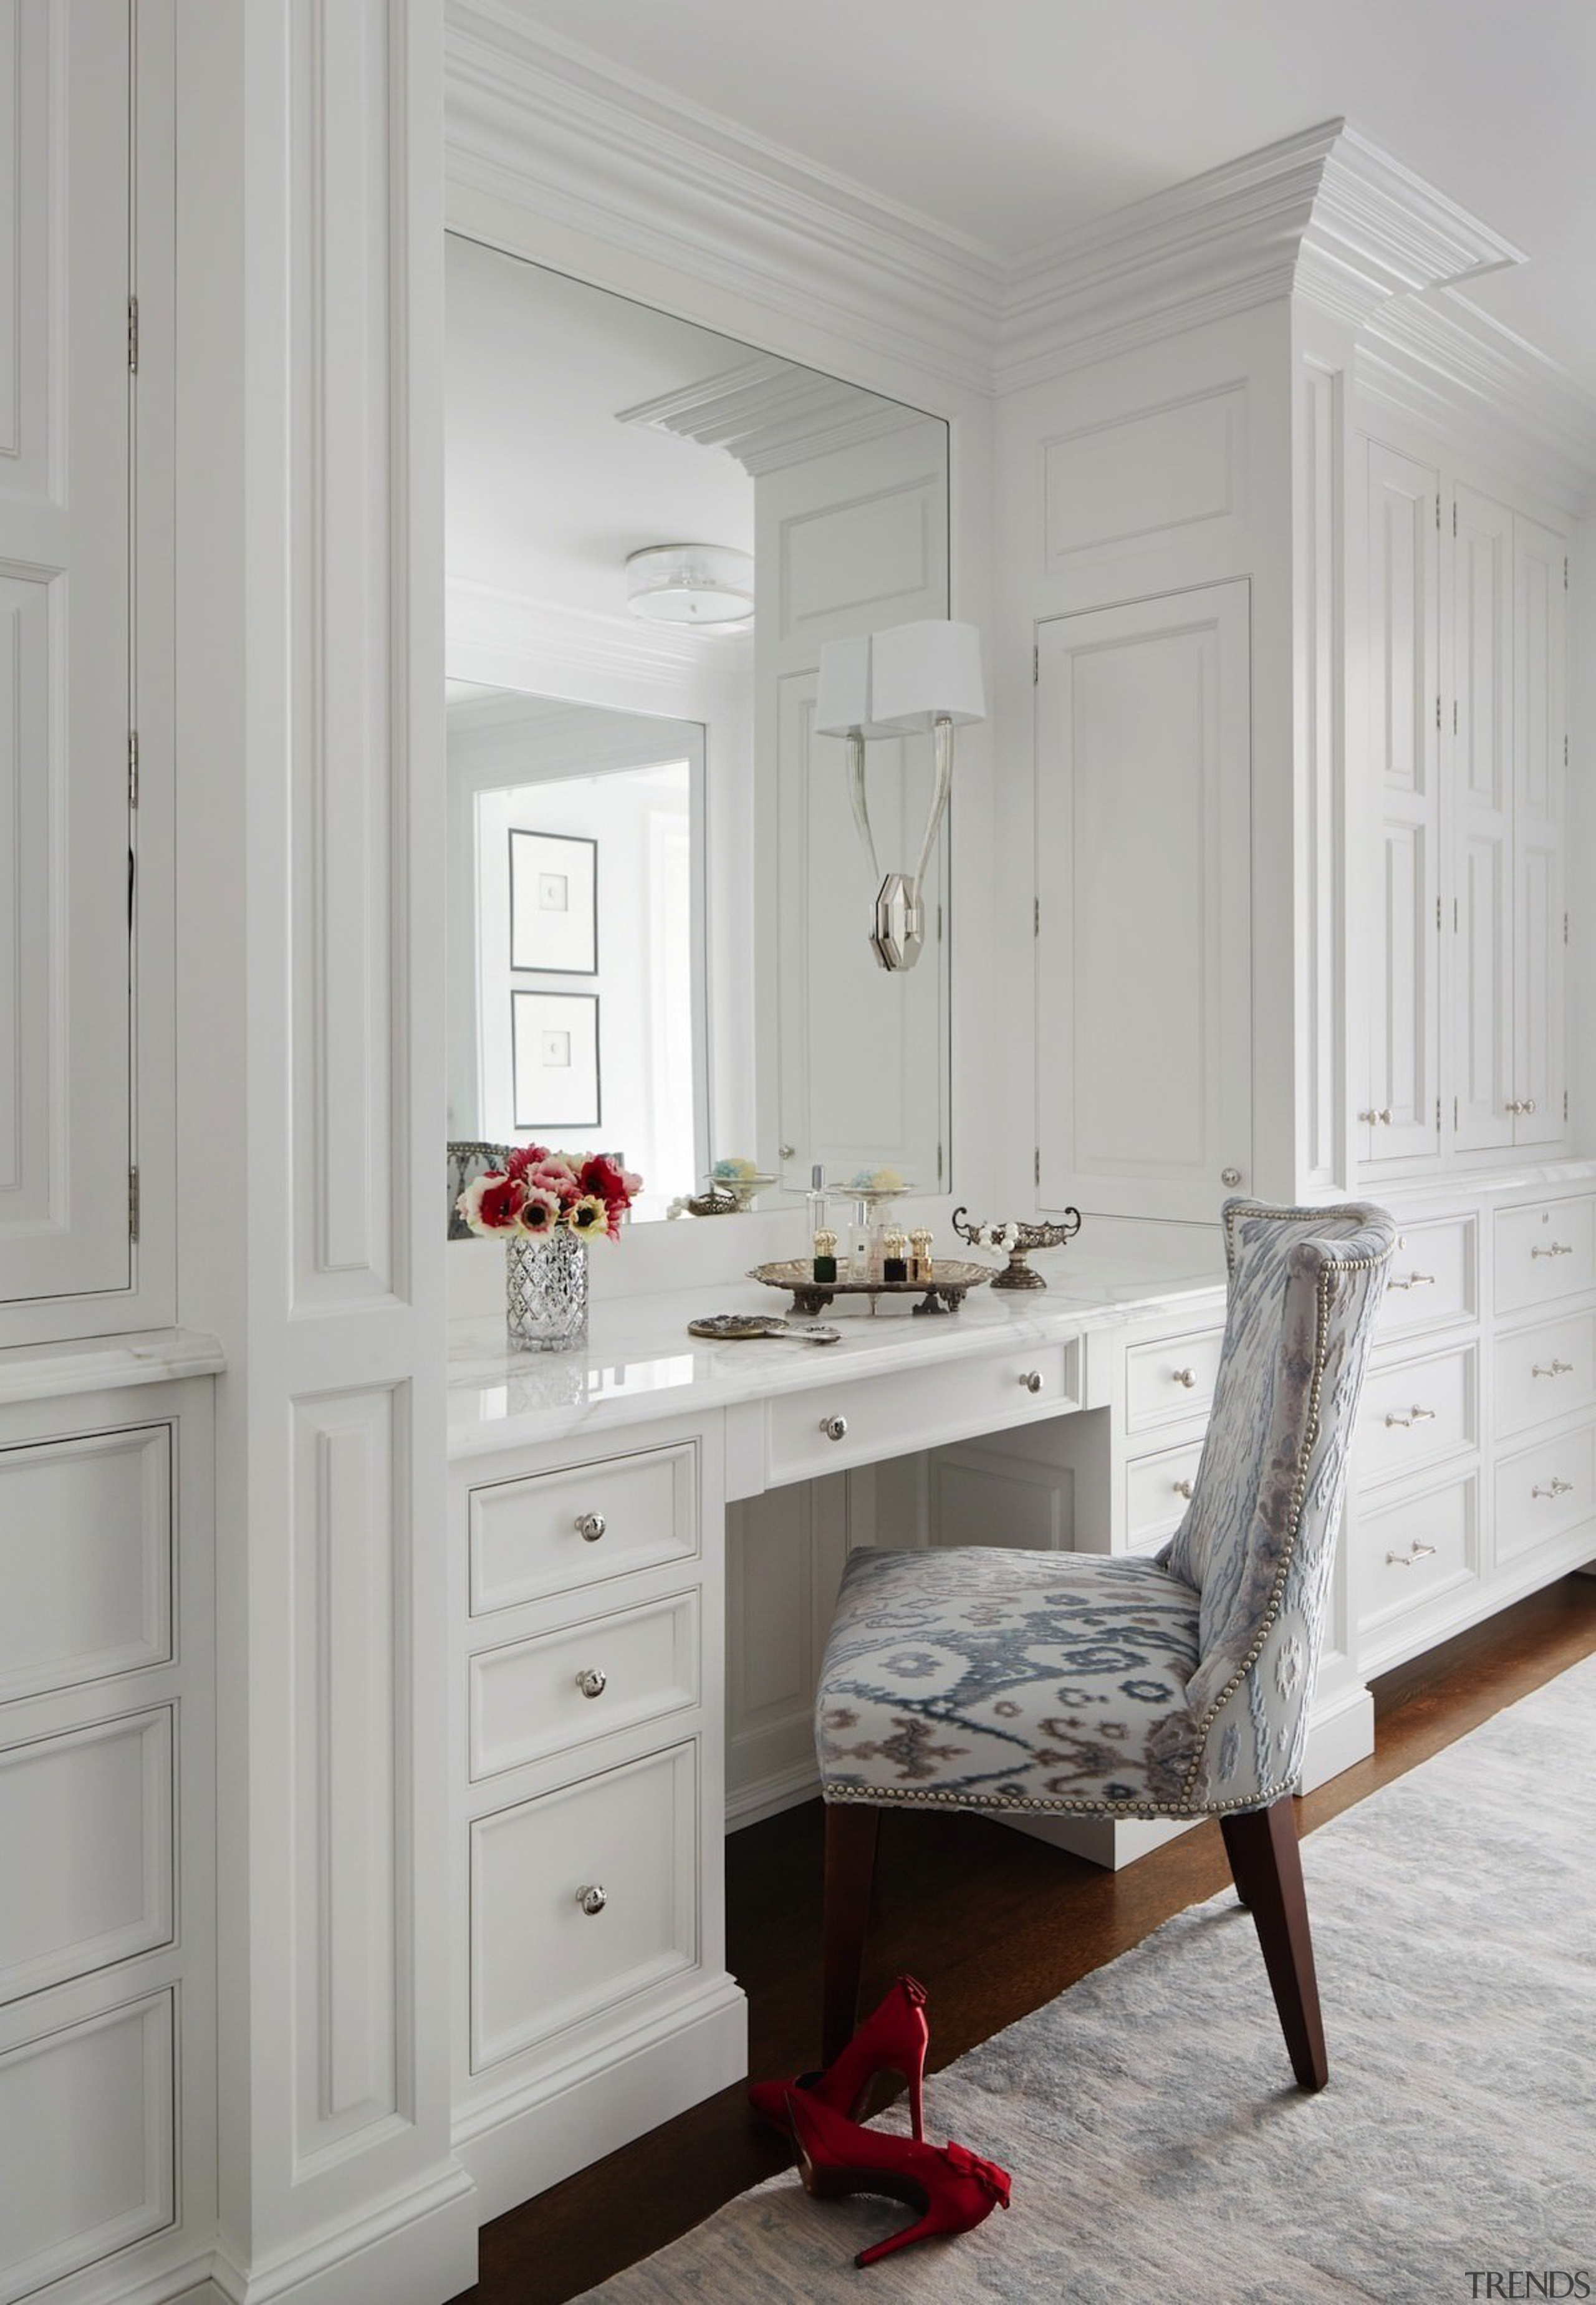 This vanity has easy access to draws and cabinetry, chest of drawers, floor, flooring, furniture, home, interior design, room, table, wall, window, gray